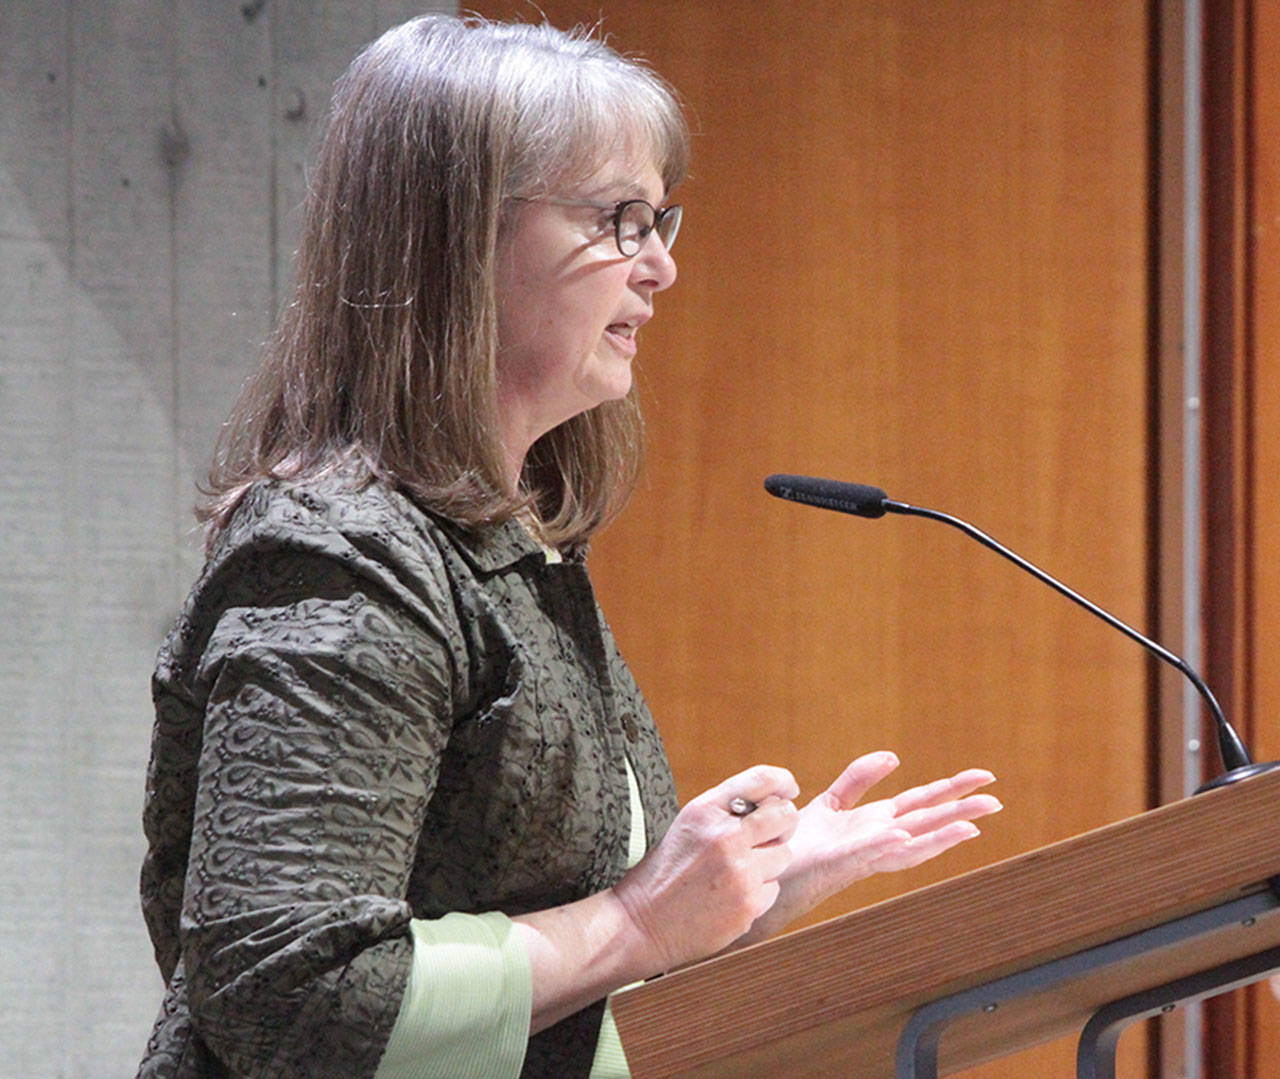 Bainbridge council candidate Leslie Schneider answers questions from the council at Tuesday’s meeting. (Brian Kelly | Bainbridge Island Review)